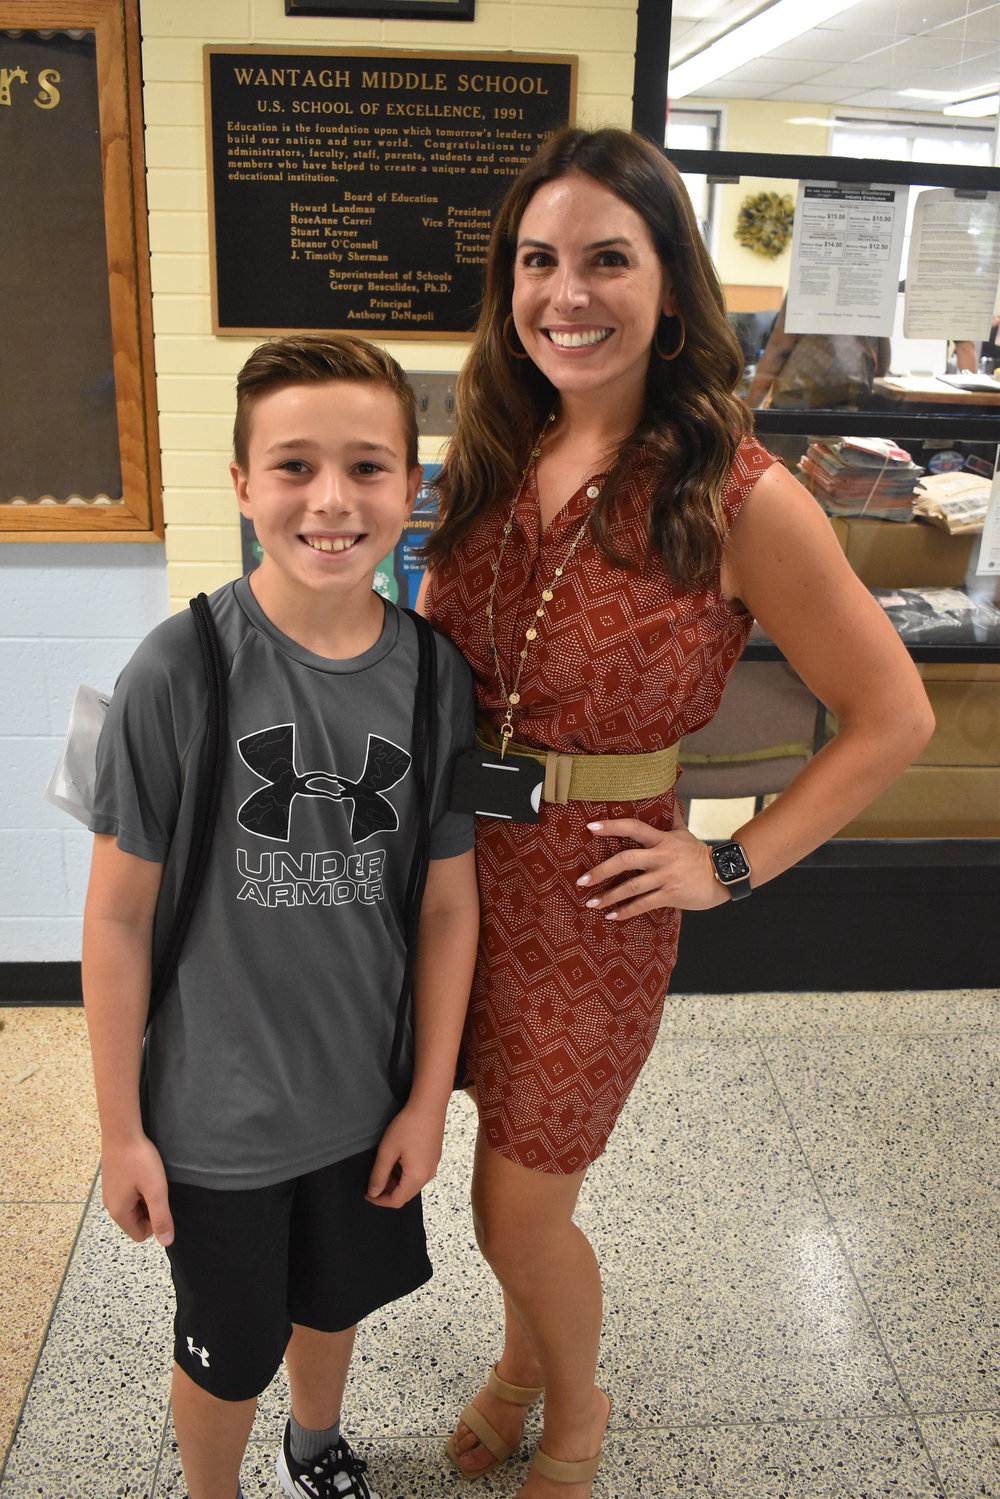 As one of her first official acts as assistant principal, Rachel Quattrocchi welcomed Jake Giovanniello at new student orientation.